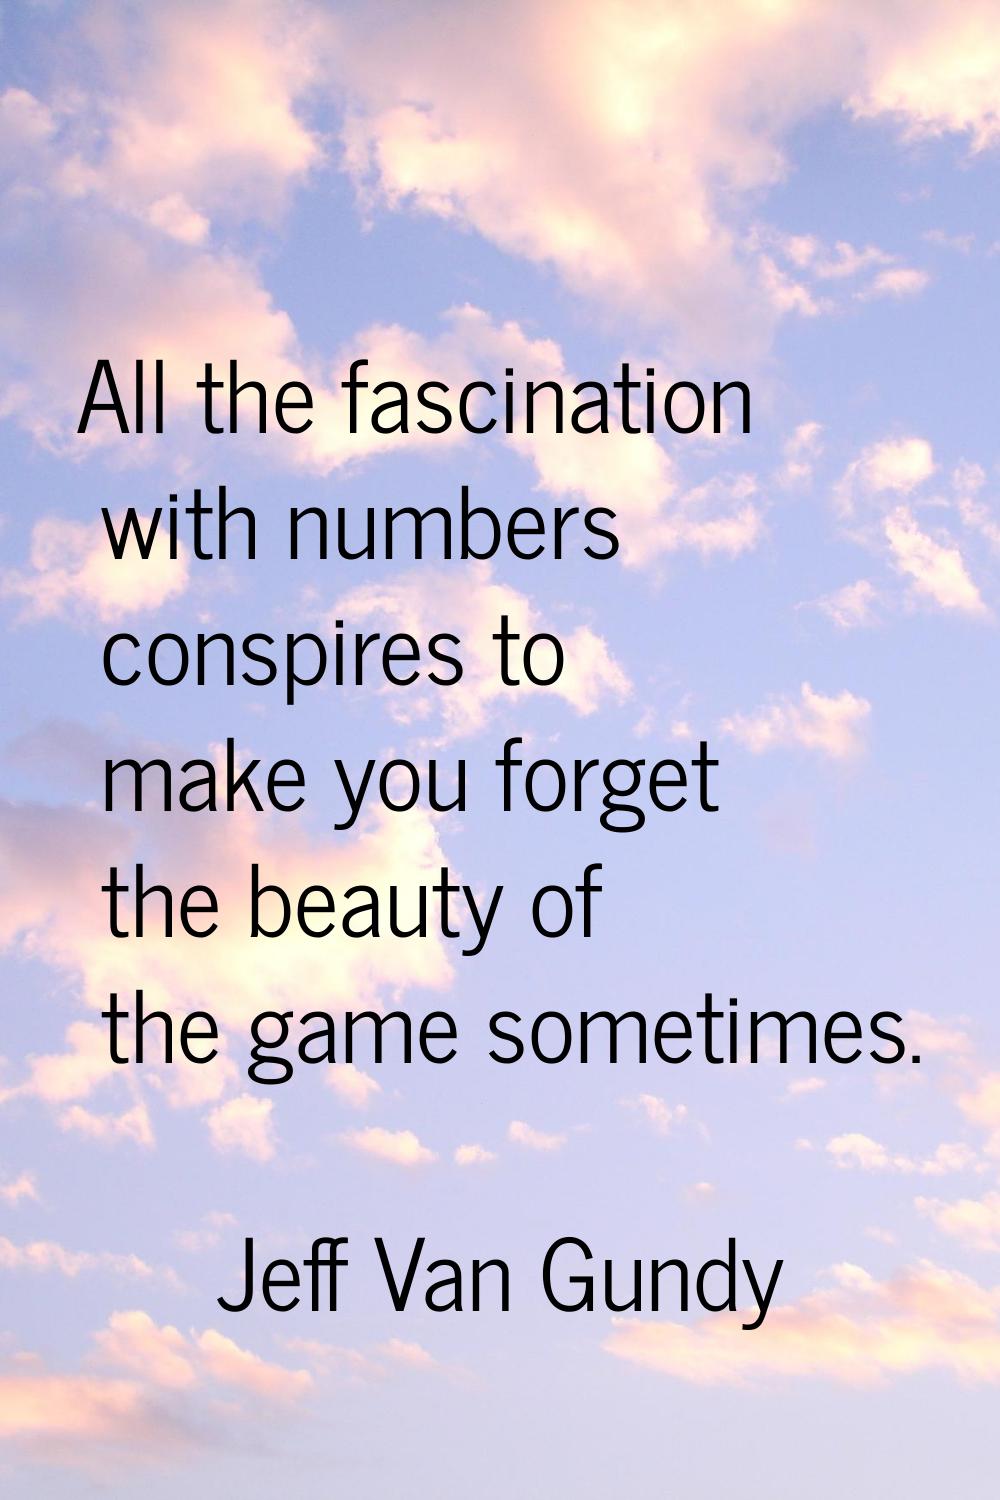 All the fascination with numbers conspires to make you forget the beauty of the game sometimes.